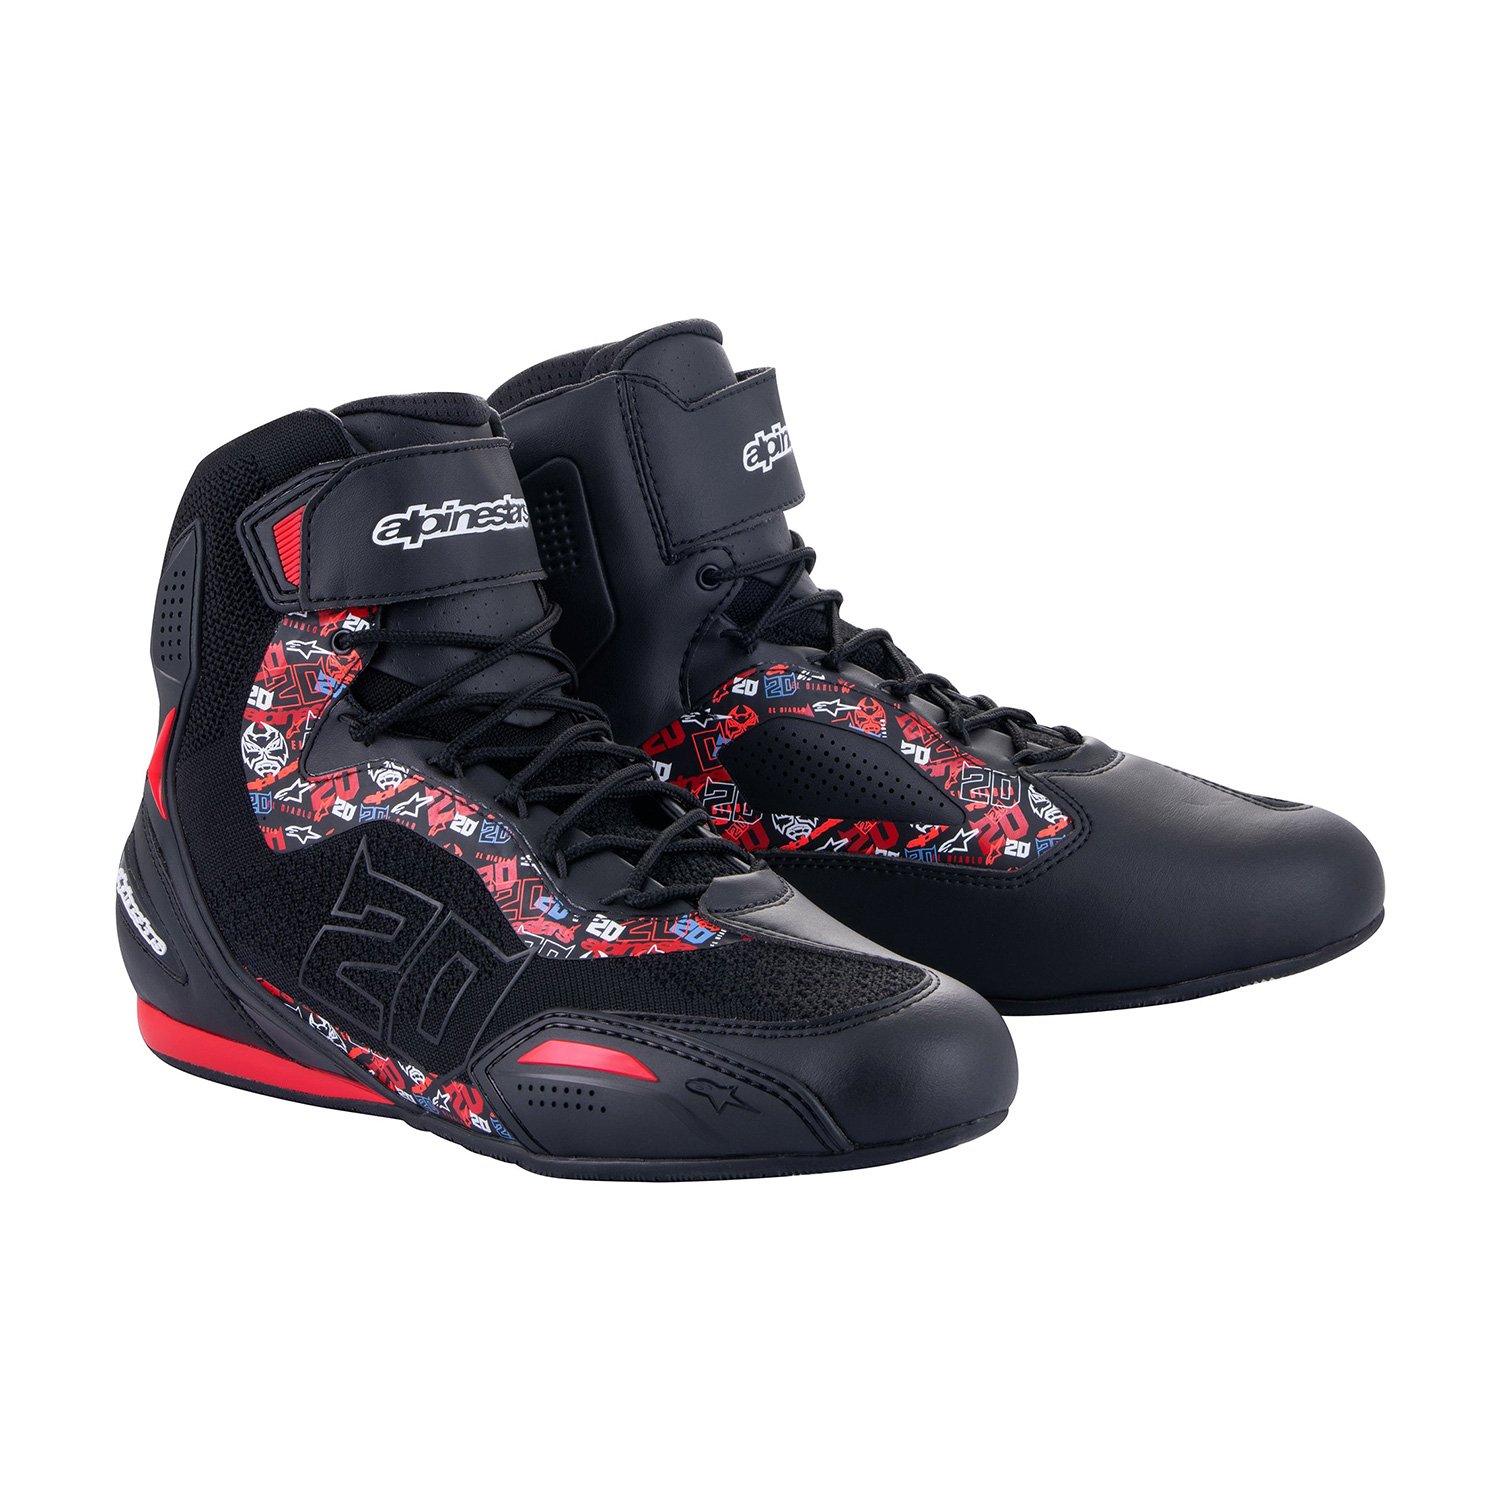 Image of Alpinestars FQ20 Faster-3 Rideknit Noir Bright Rouge Chaussures Taille US 10